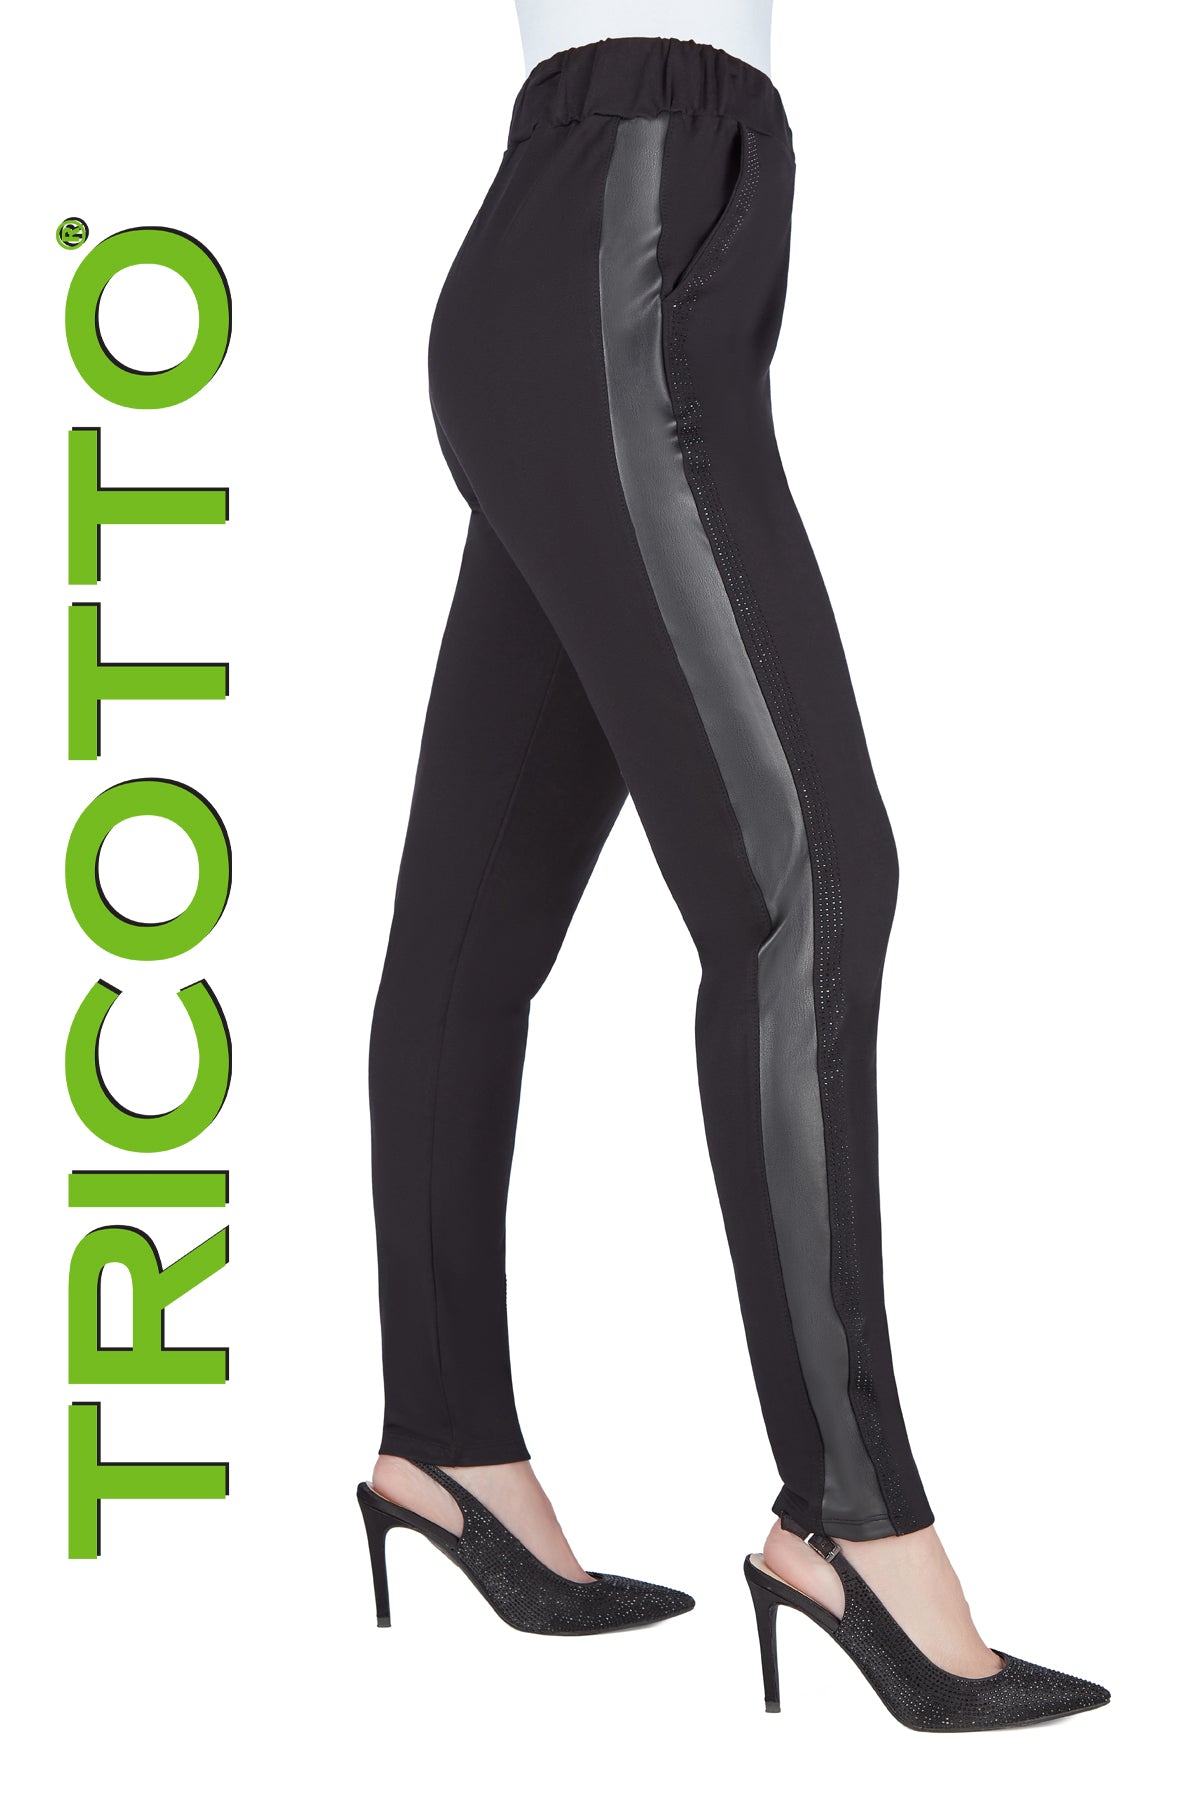 Tricotto Black Pants-Tricotto Jeans-Tricotto Fashion Montreal-Tricotto Online Shop-Tricotto Fall 2022 Collection